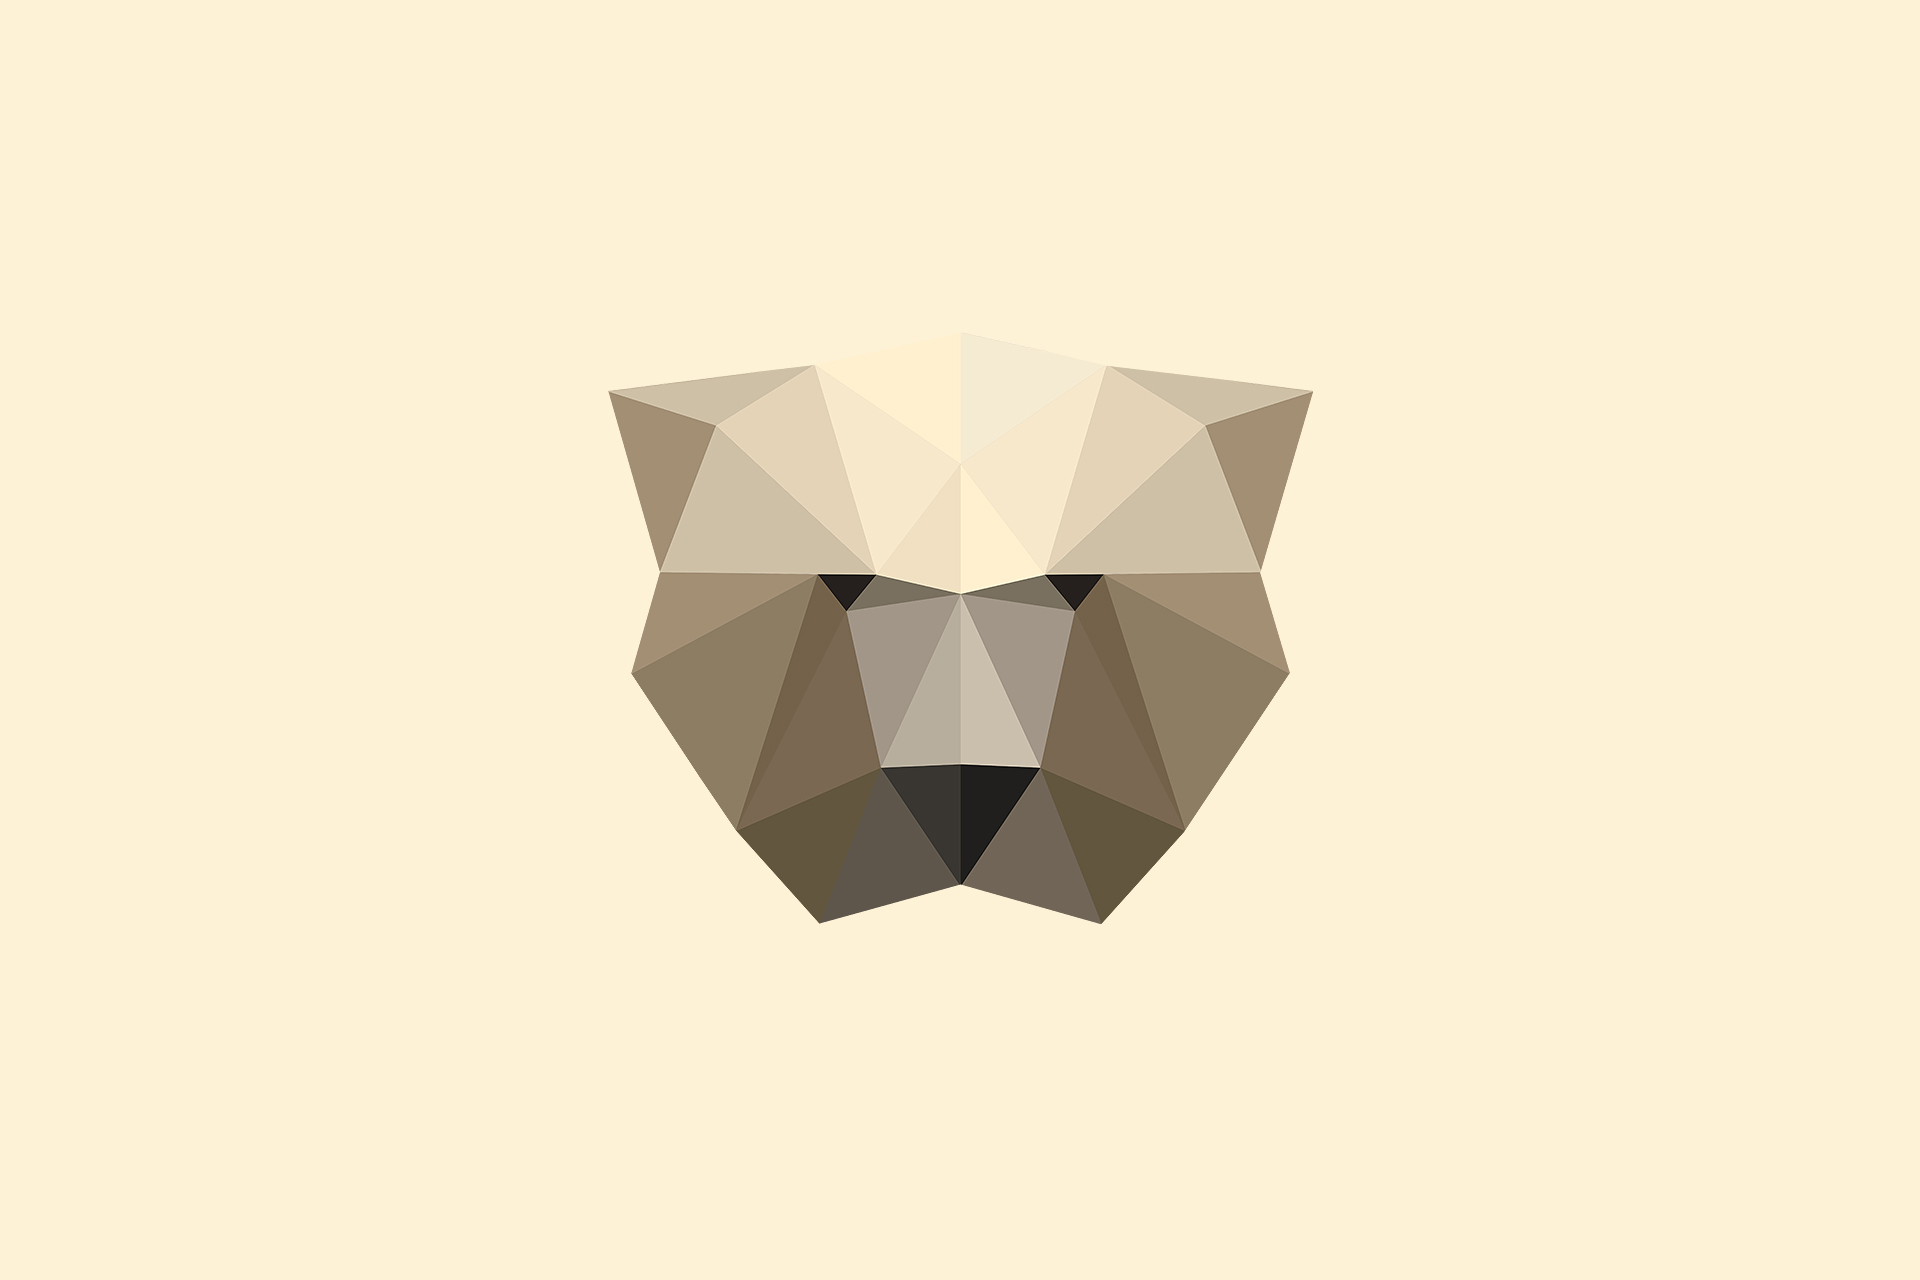 Polygonal style of low poly in design